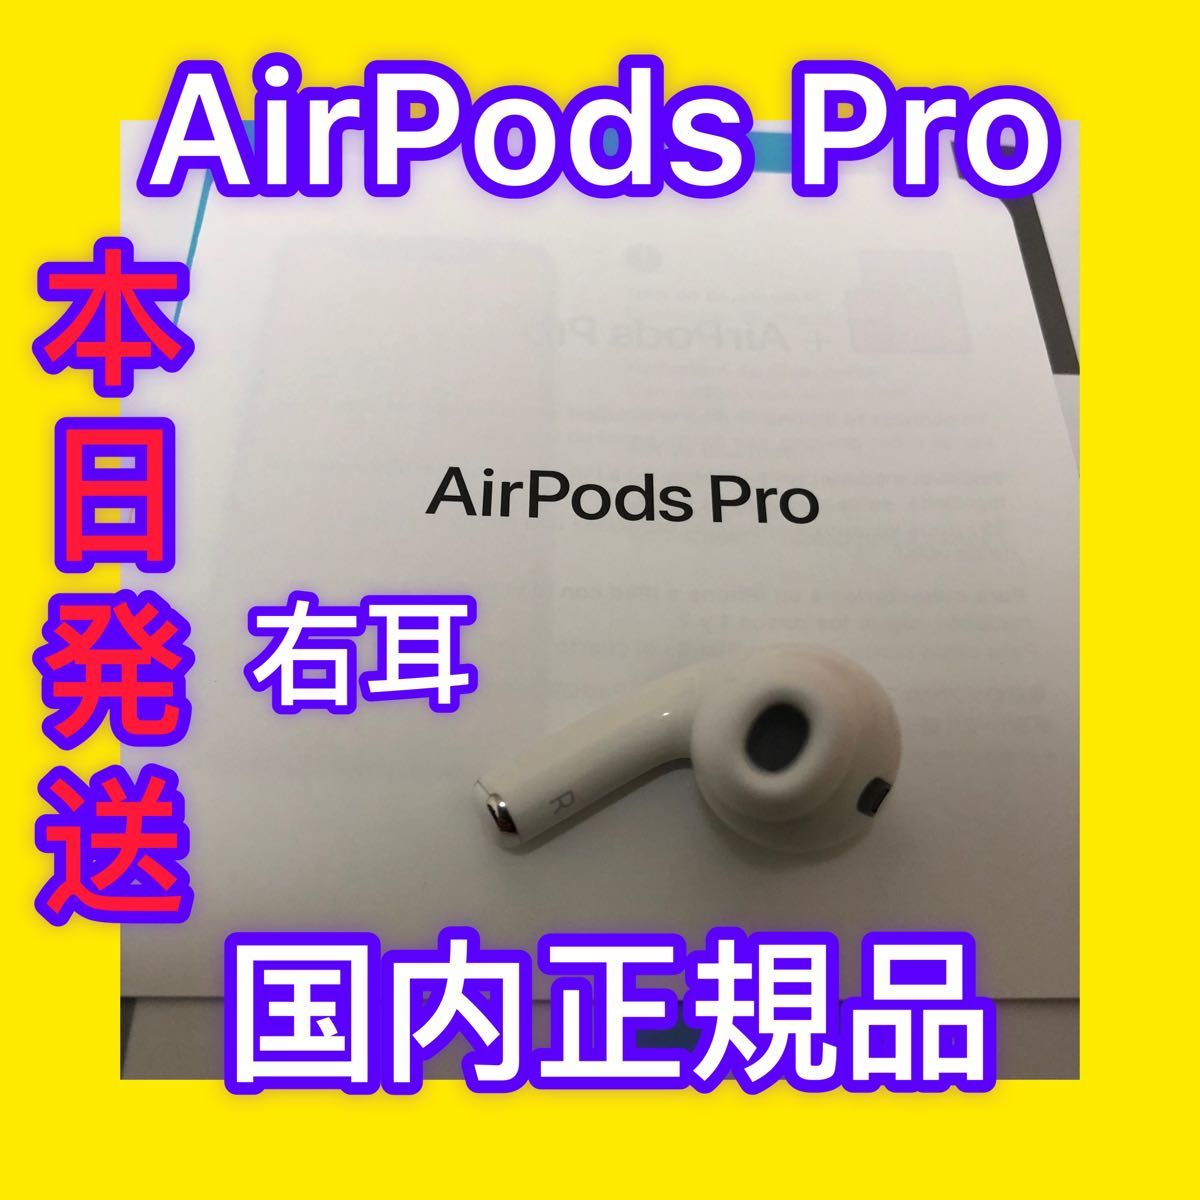 AirPods Pro 右耳 国内正規品 第一世代 エアーポッズ純正品｜PayPayフリマ